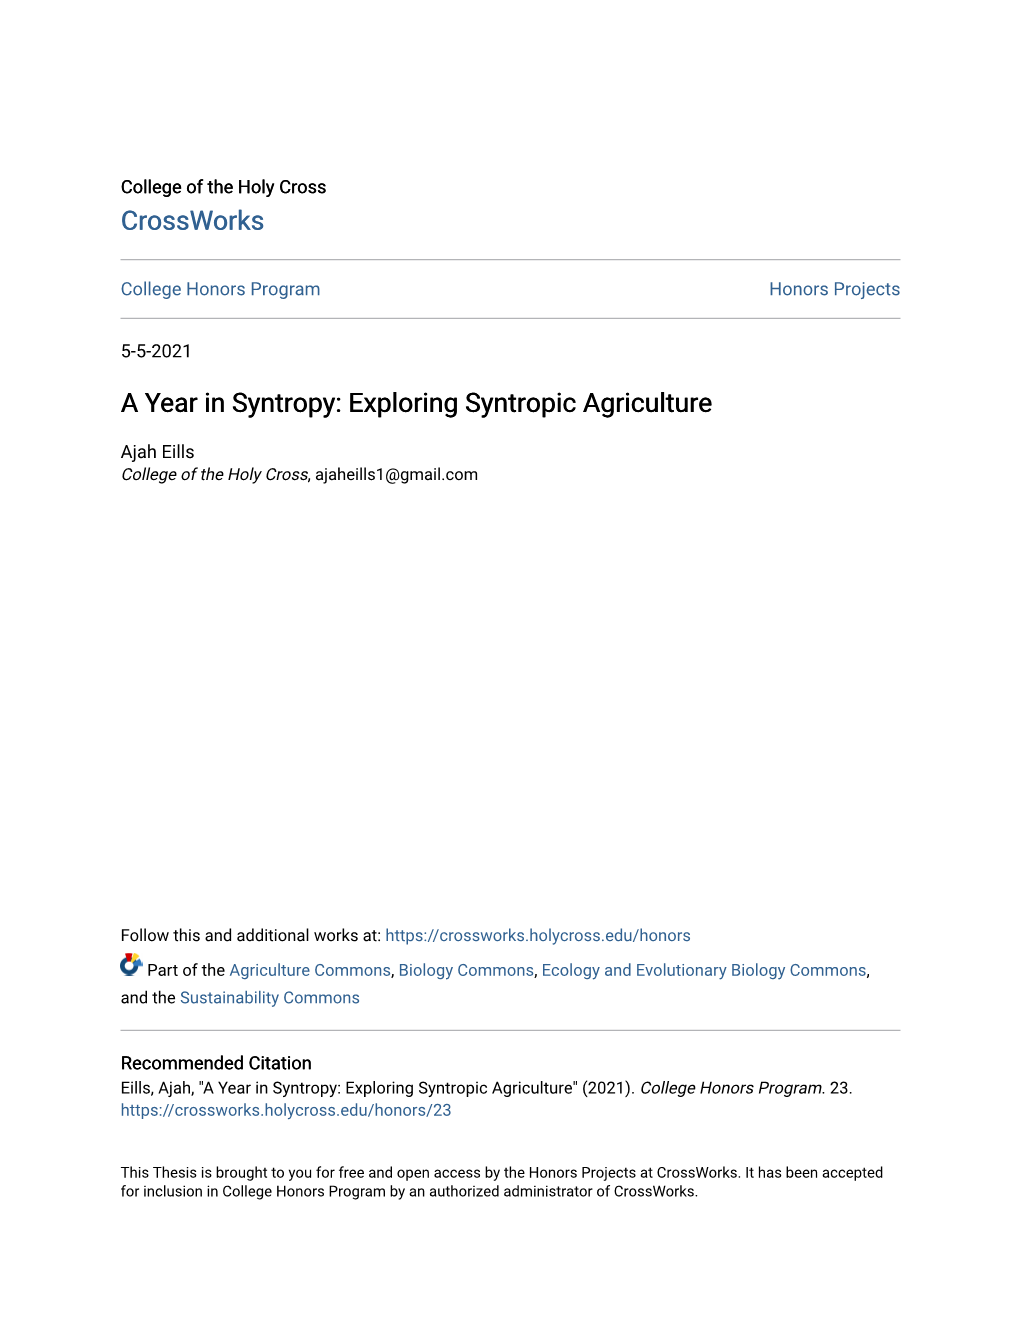 A Year in Syntropy: Exploring Syntropic Agriculture